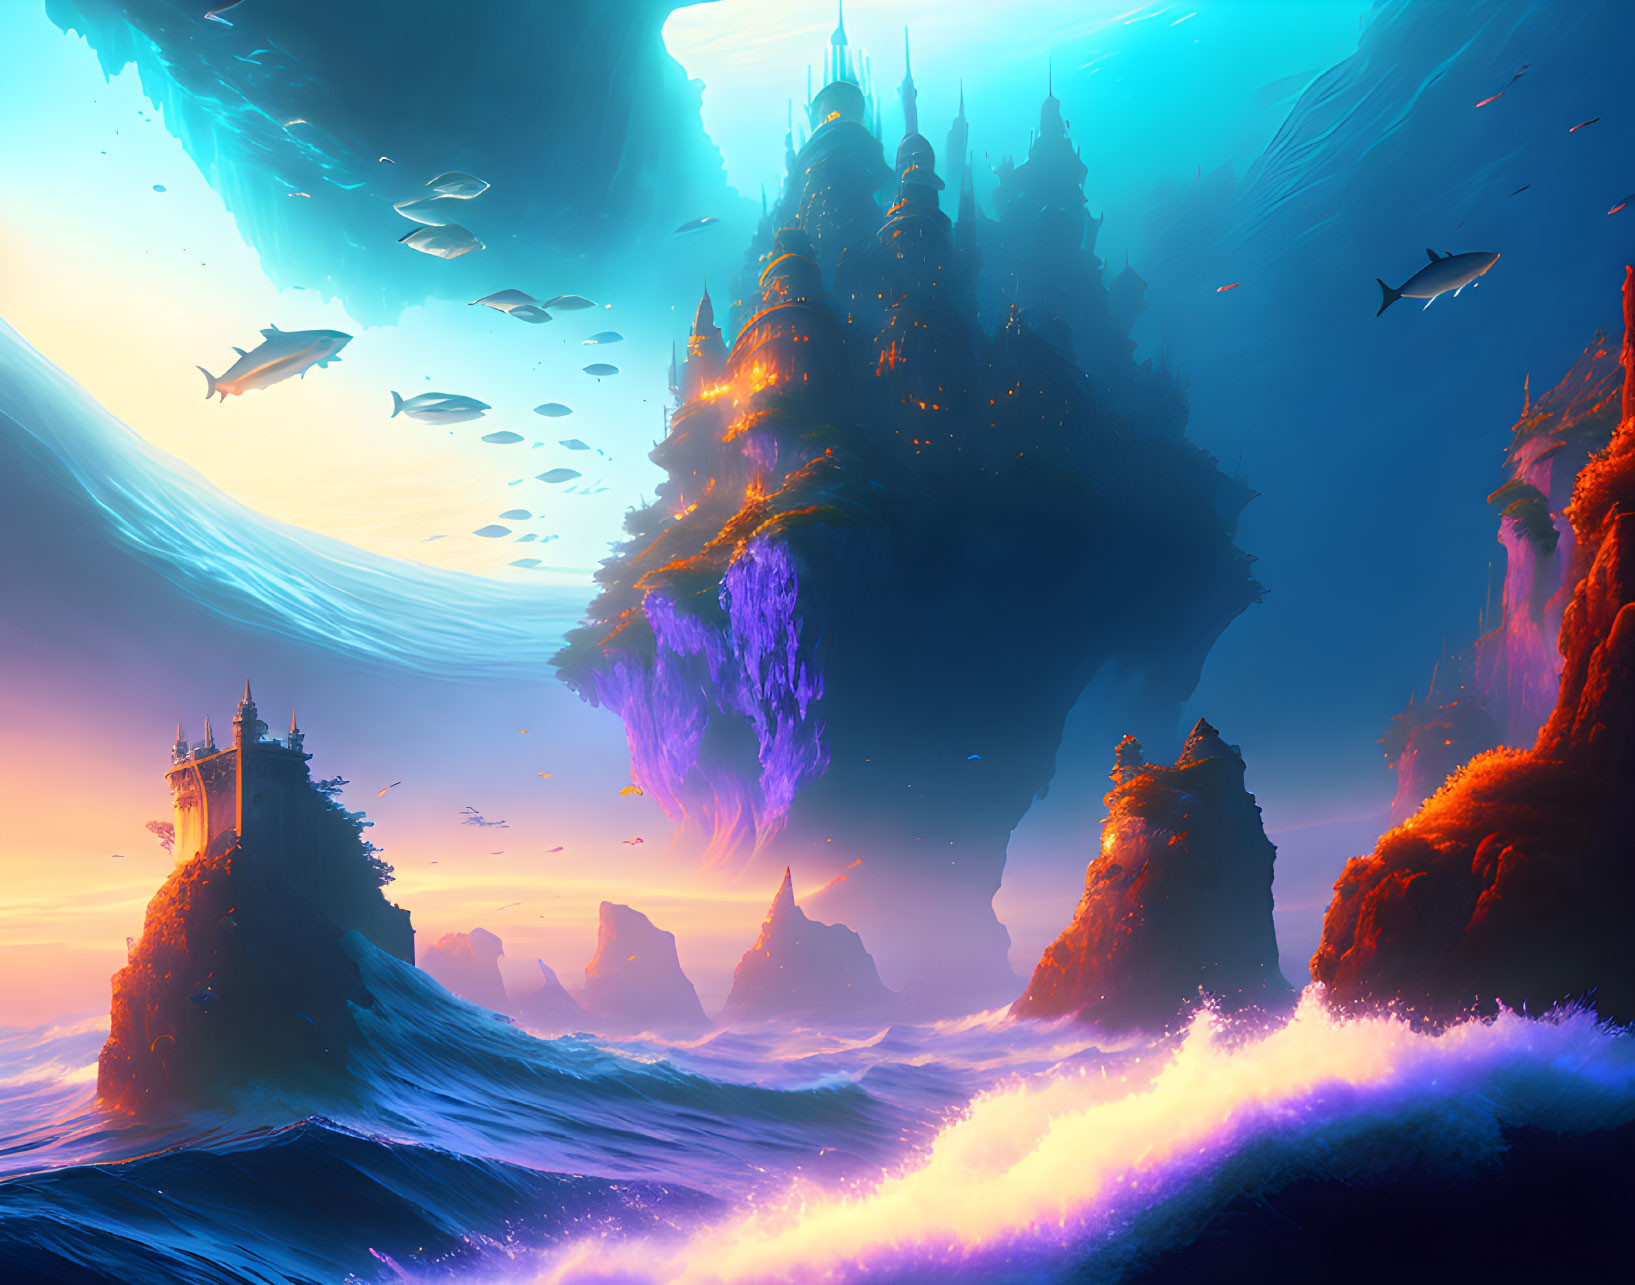 Fantastical seascape with floating islands and glowing waterfalls